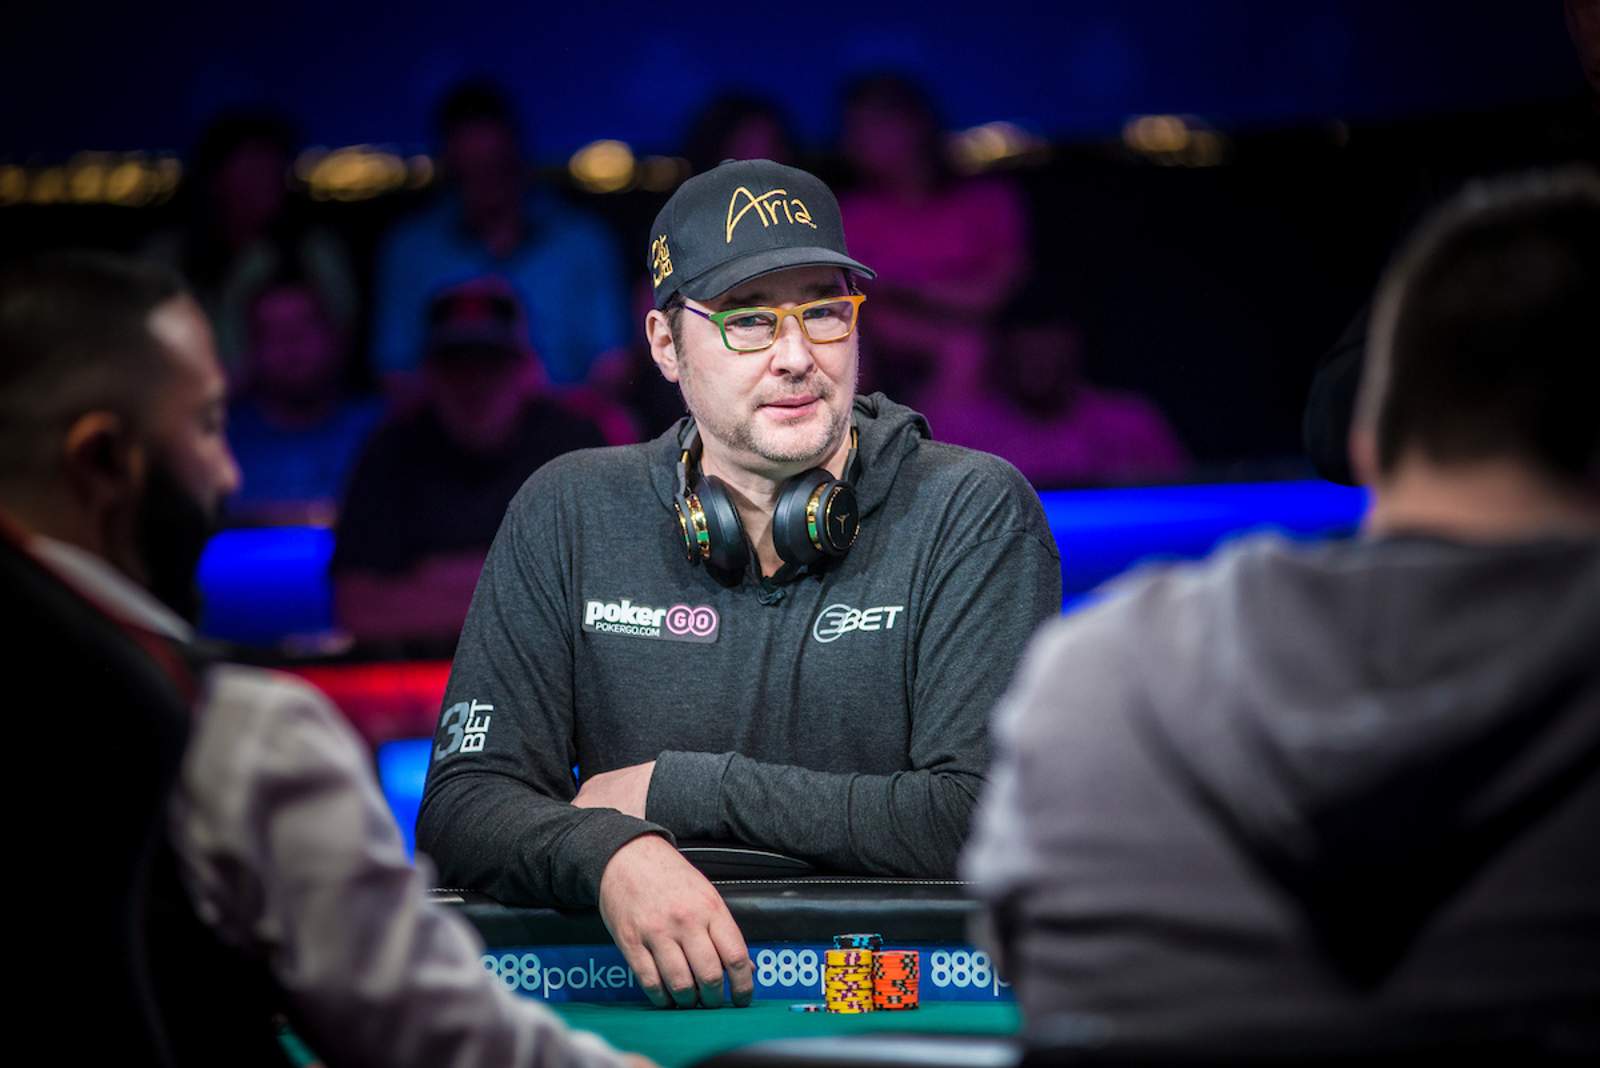 Phil Hellmuth Wraps Up The "Holidays" In Style on "Poker After Dark"